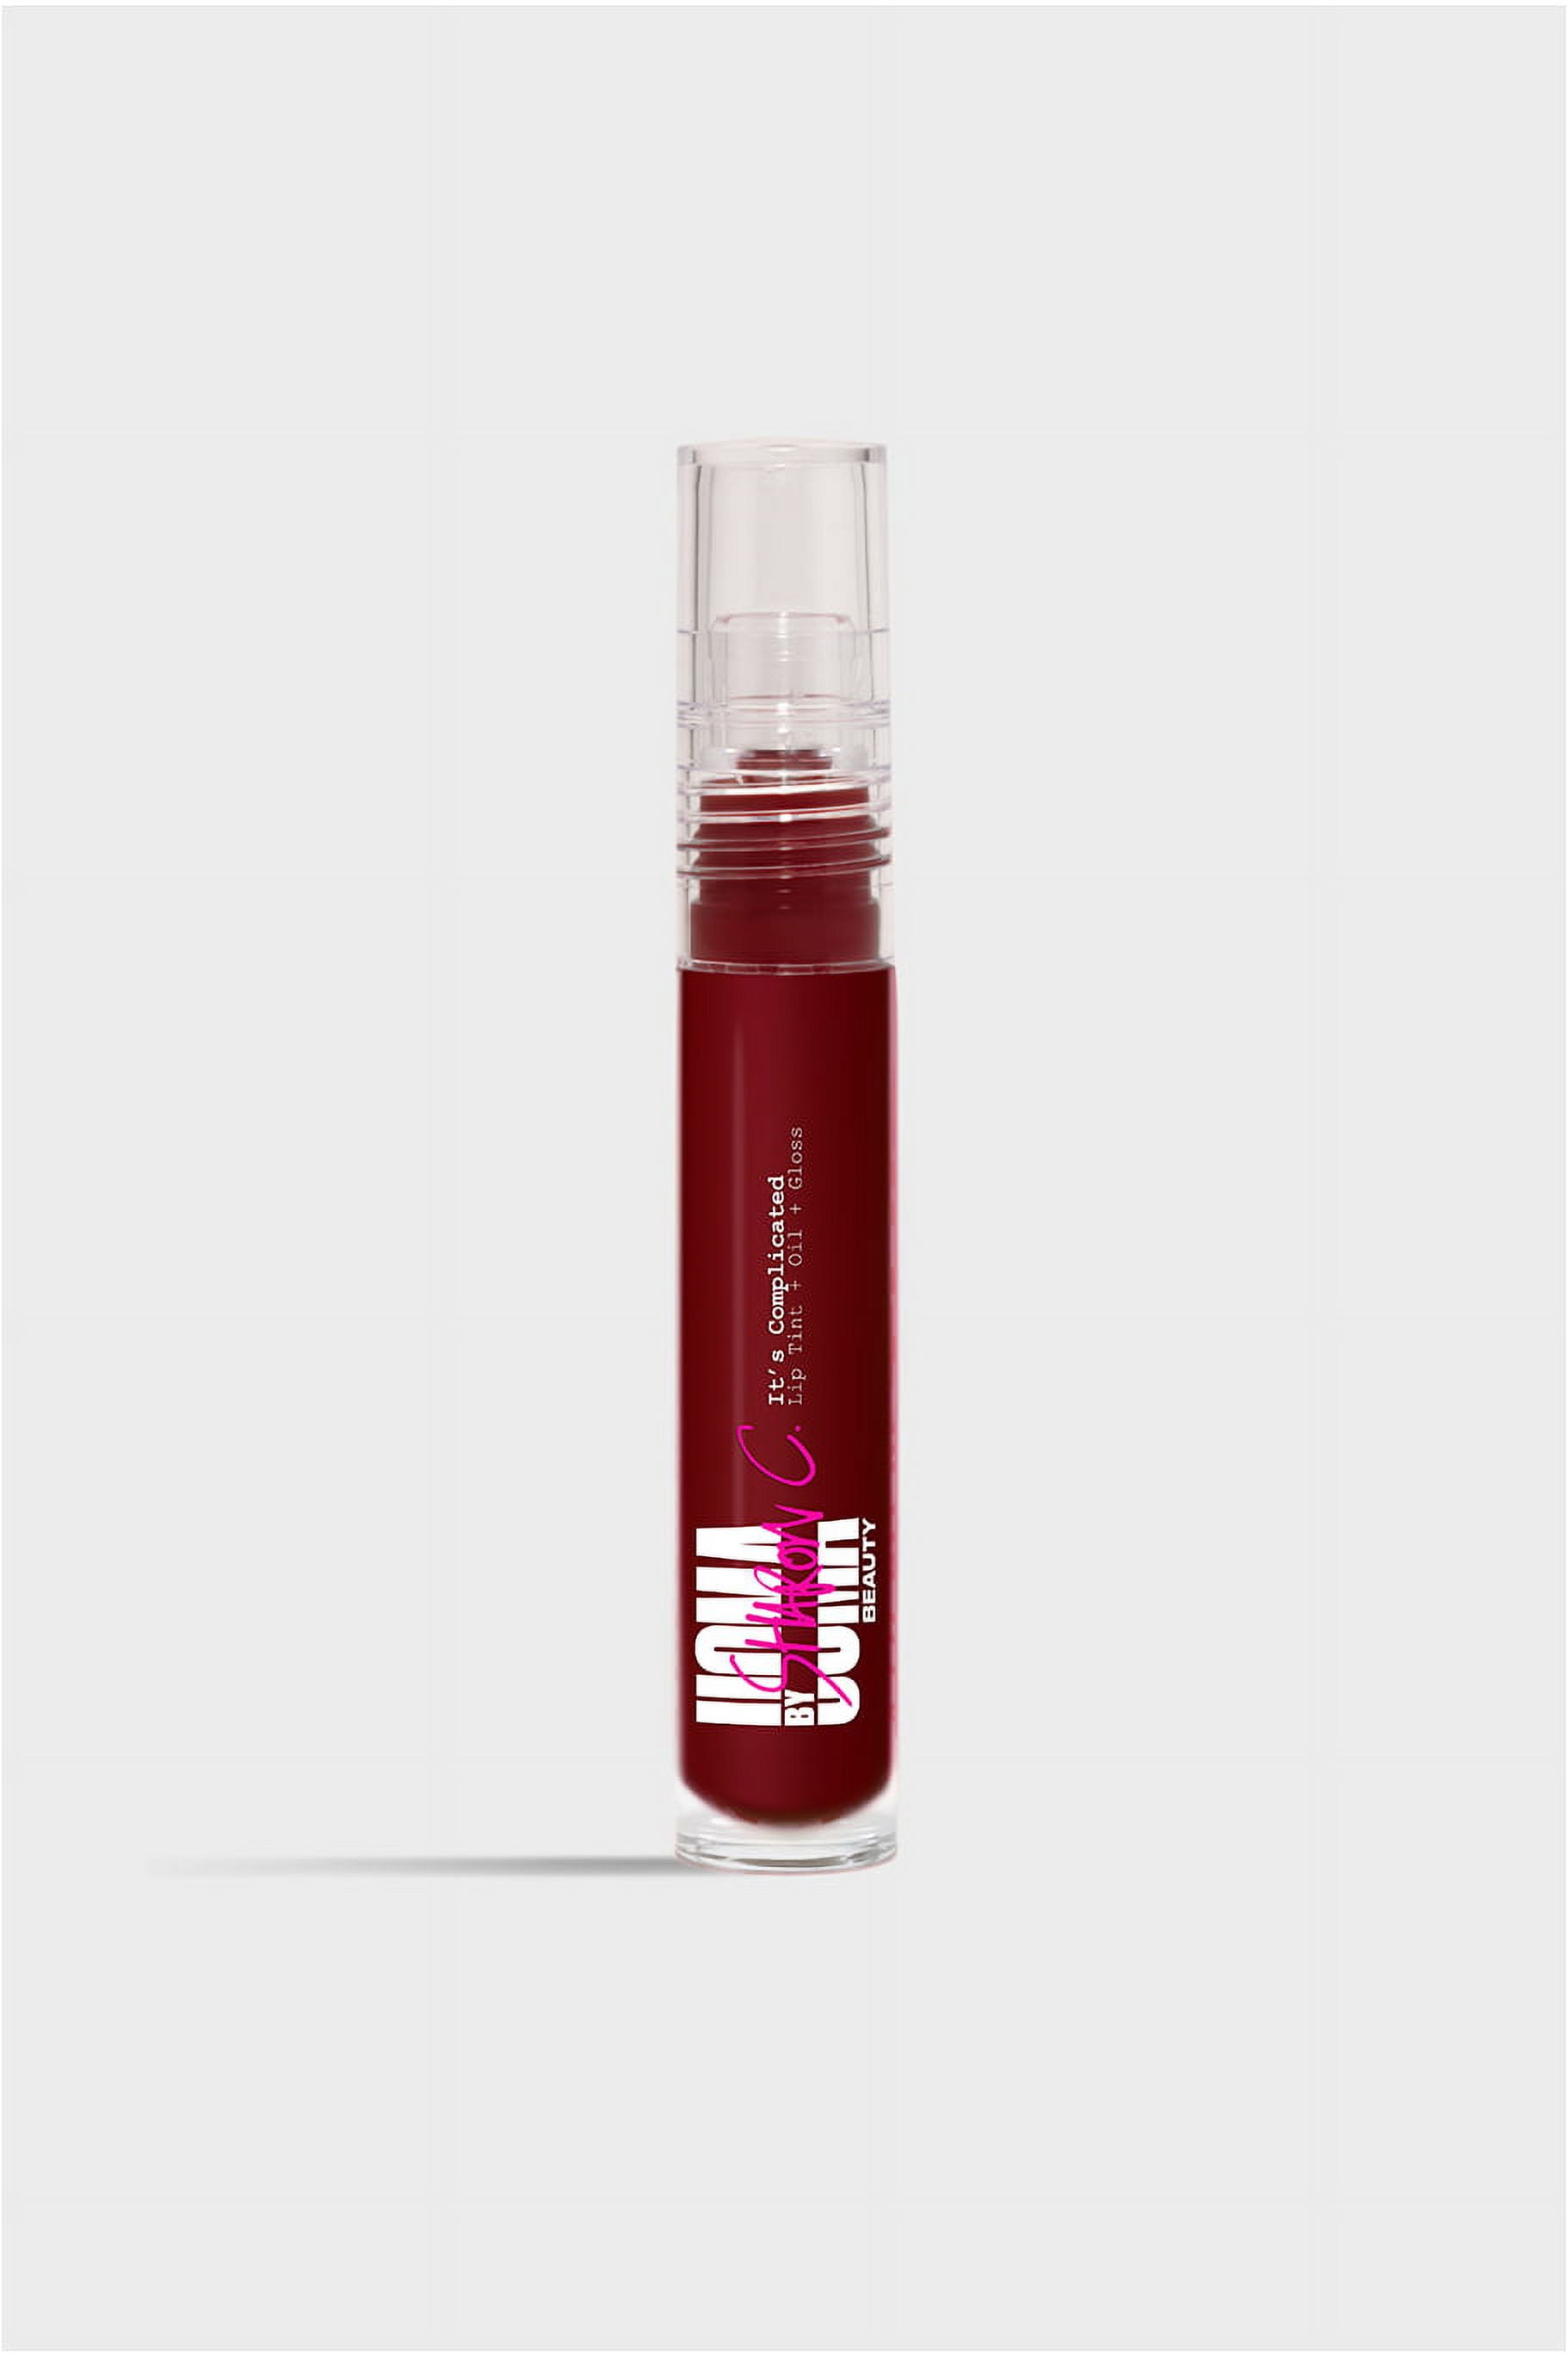 Uoma by Sharon C, It's Complicated Lip Tint + Oil + Gloss Boasty